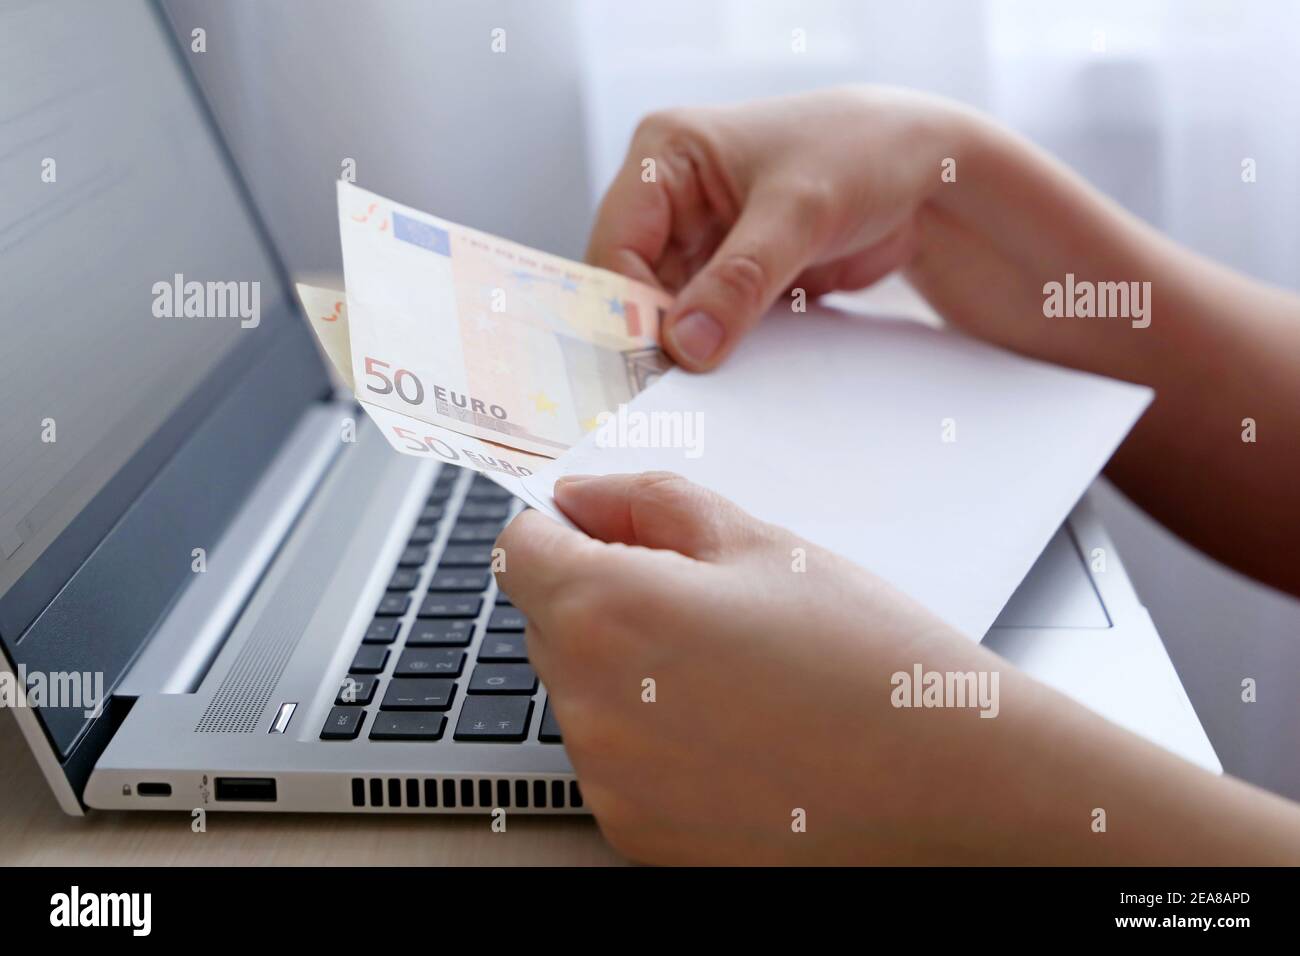 Envelope with euro banknotes in female hands. Woman pulls money out of an envelope on laptop background, wages, bonus or bribe concept Stock Photo